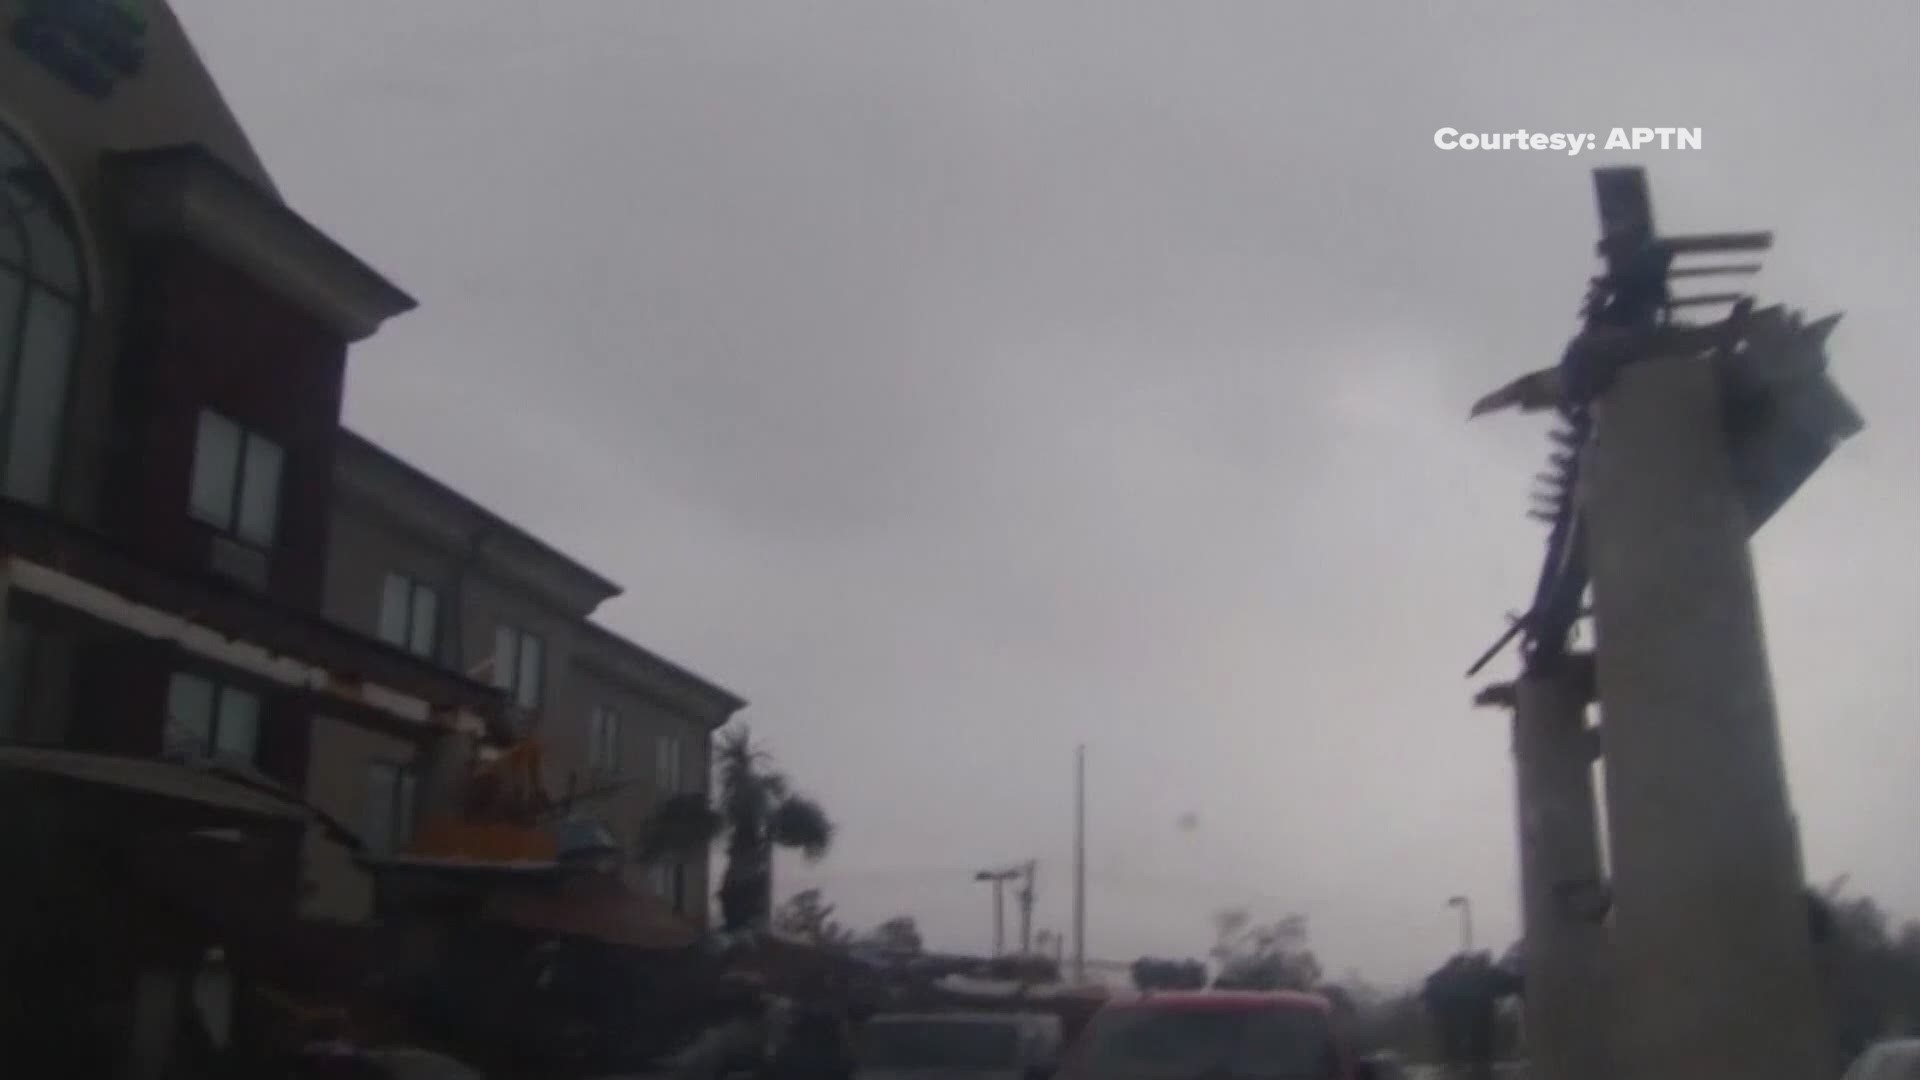 Hurricane Michael made landfall in Panama City, Florida on Wednesday ripping off the canopy roof of a hotel and destroying nearby cars, signs and building fixtures.